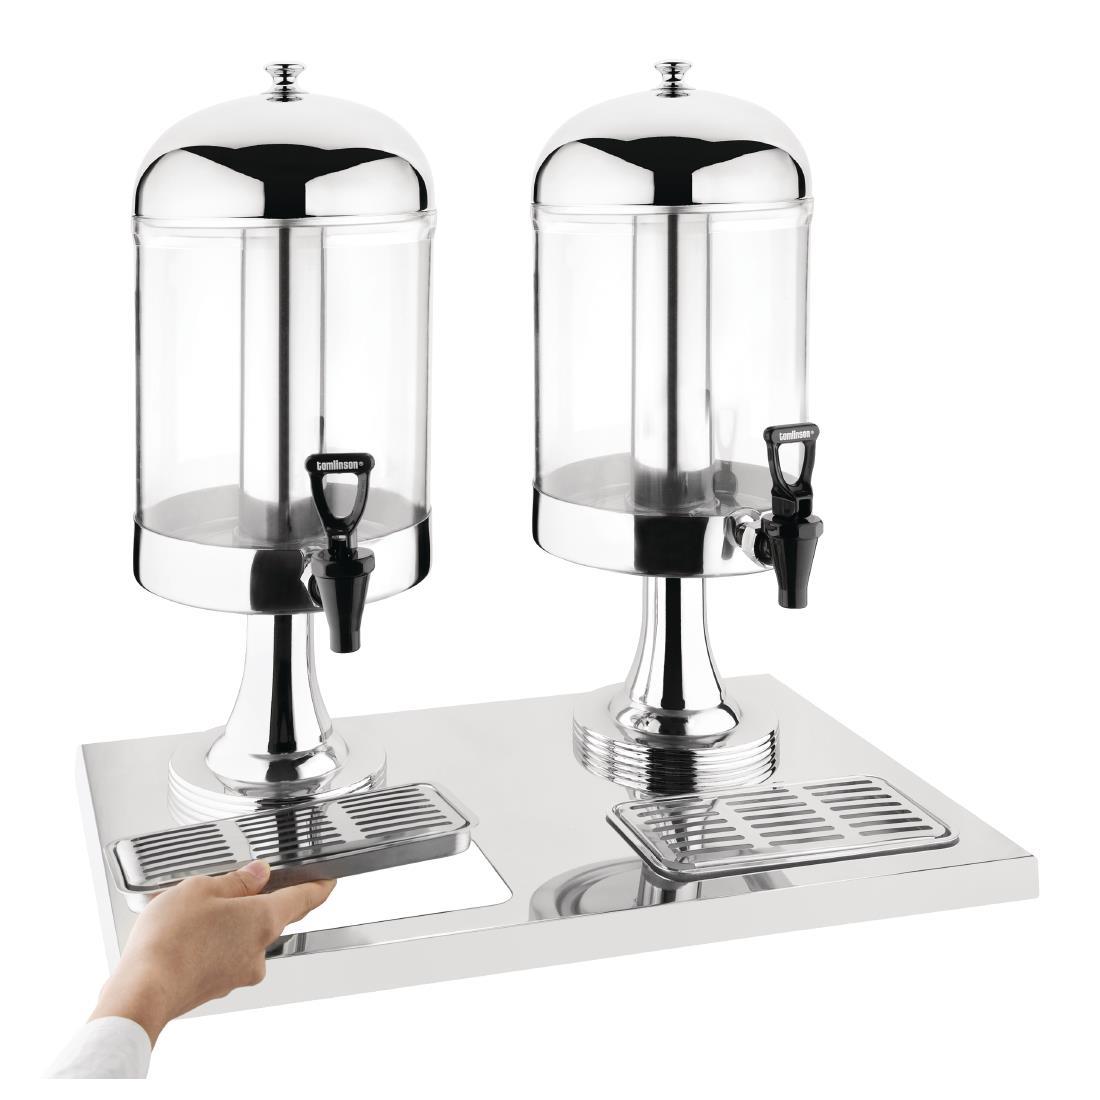 Olympia Double Juice Dispenser with Drip Tray - J184  - 2